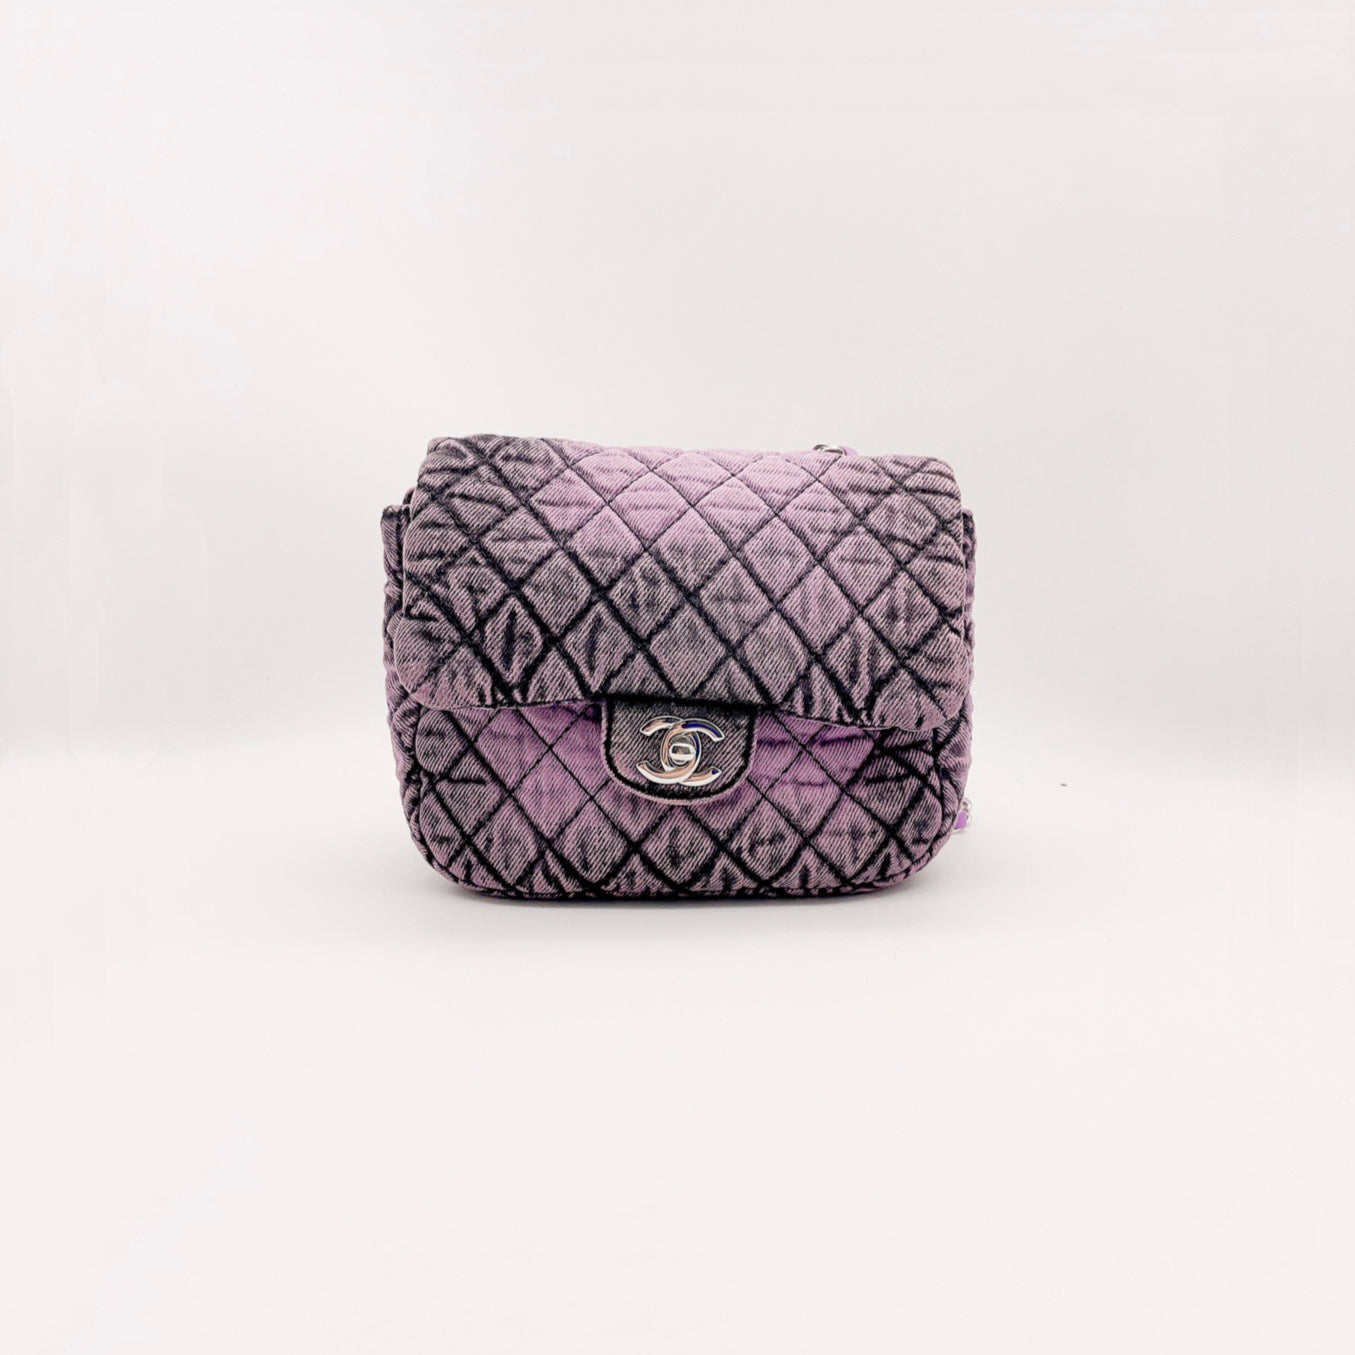 Chanel Denim Quilted Mini Flap Bag - Chanel